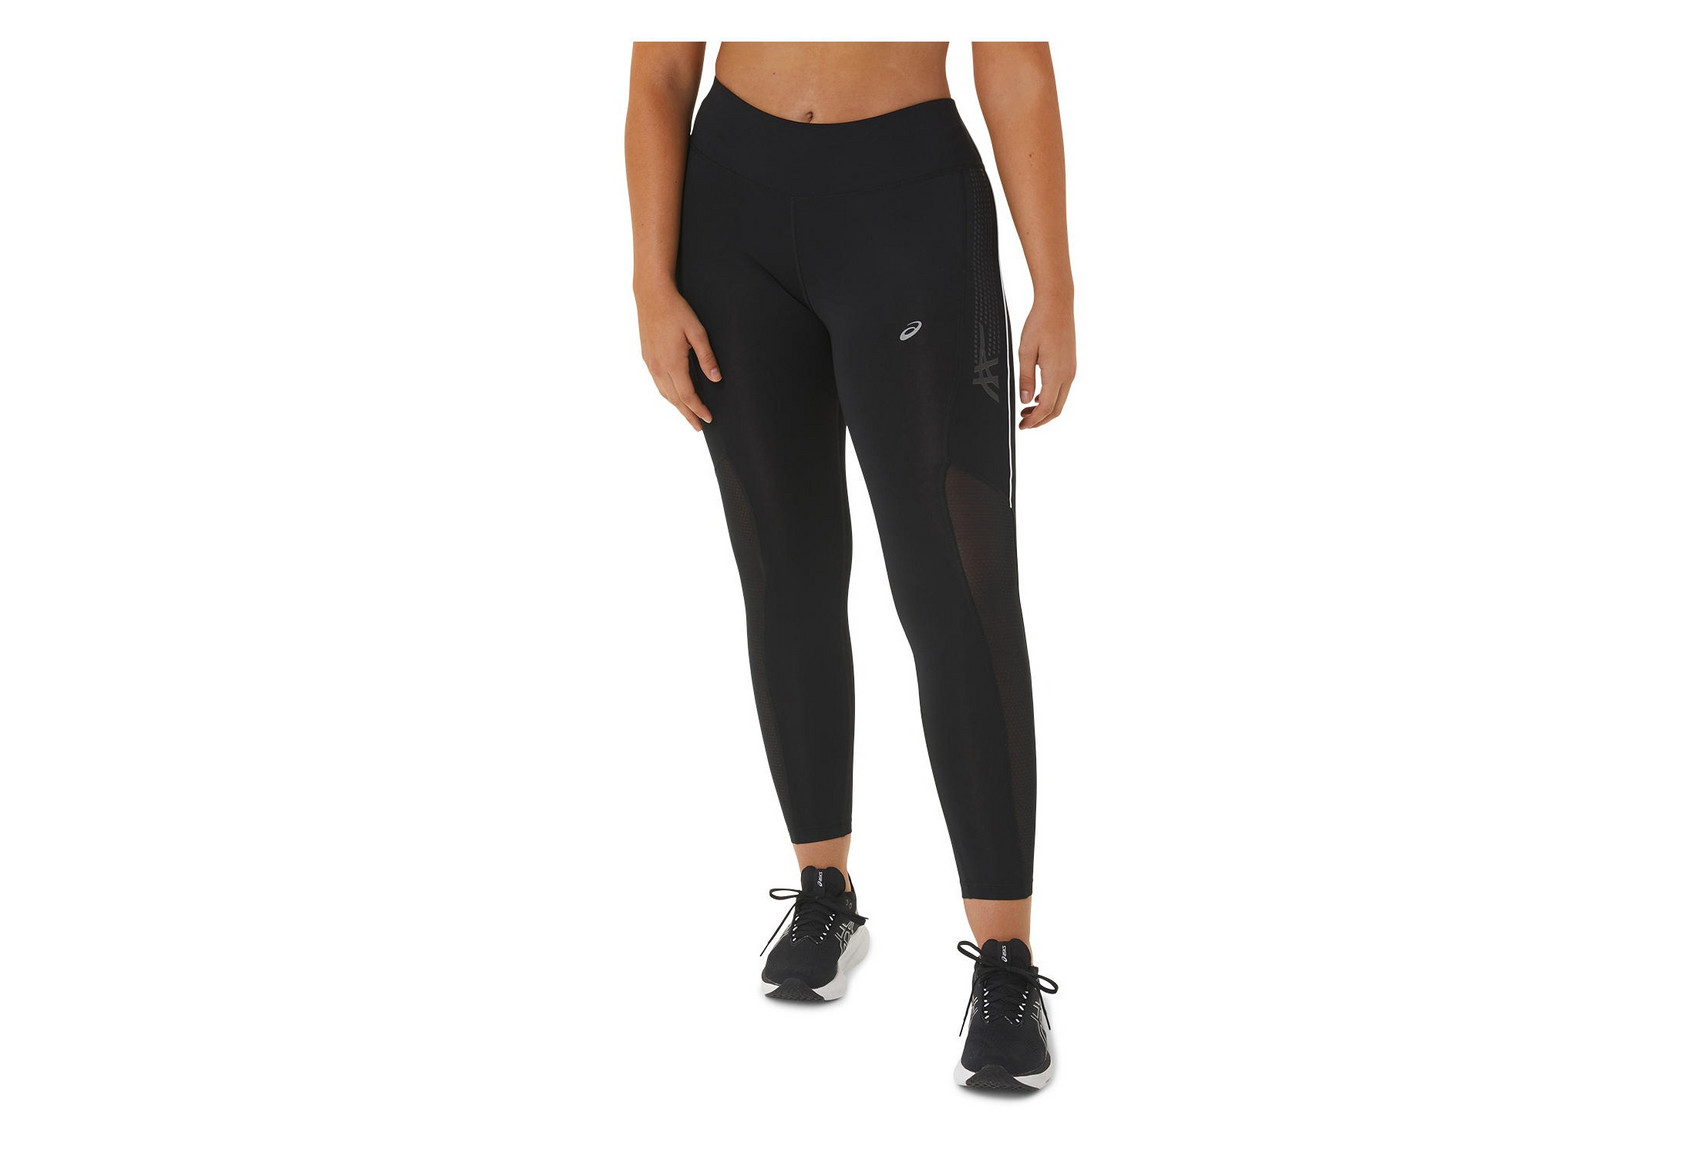 Nike Pro Swoosh Compression Tights & Reviews